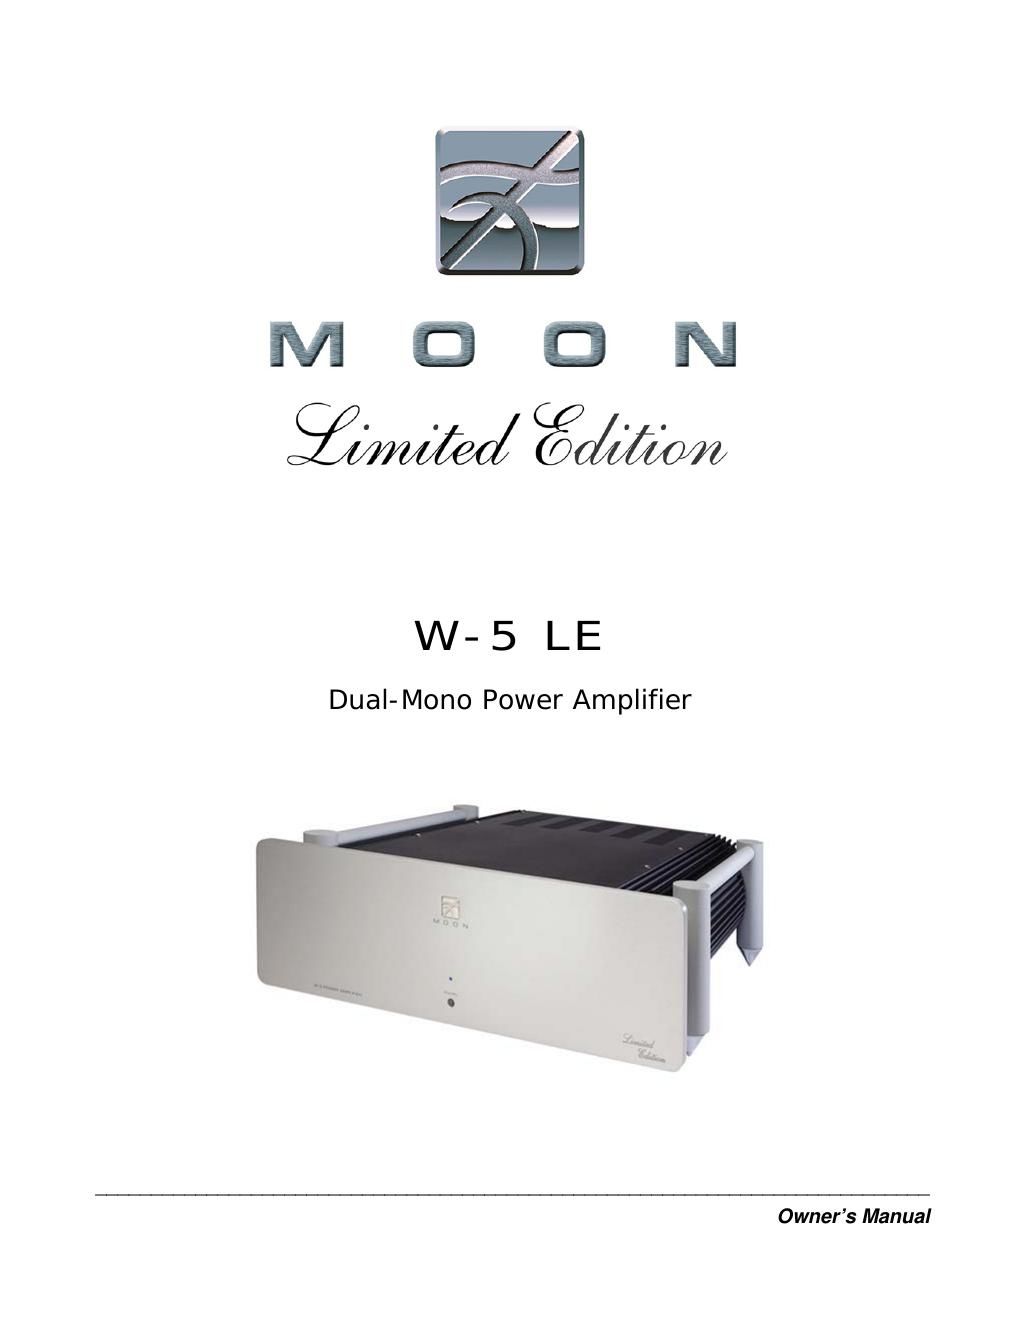 moon w 5 le owners manual